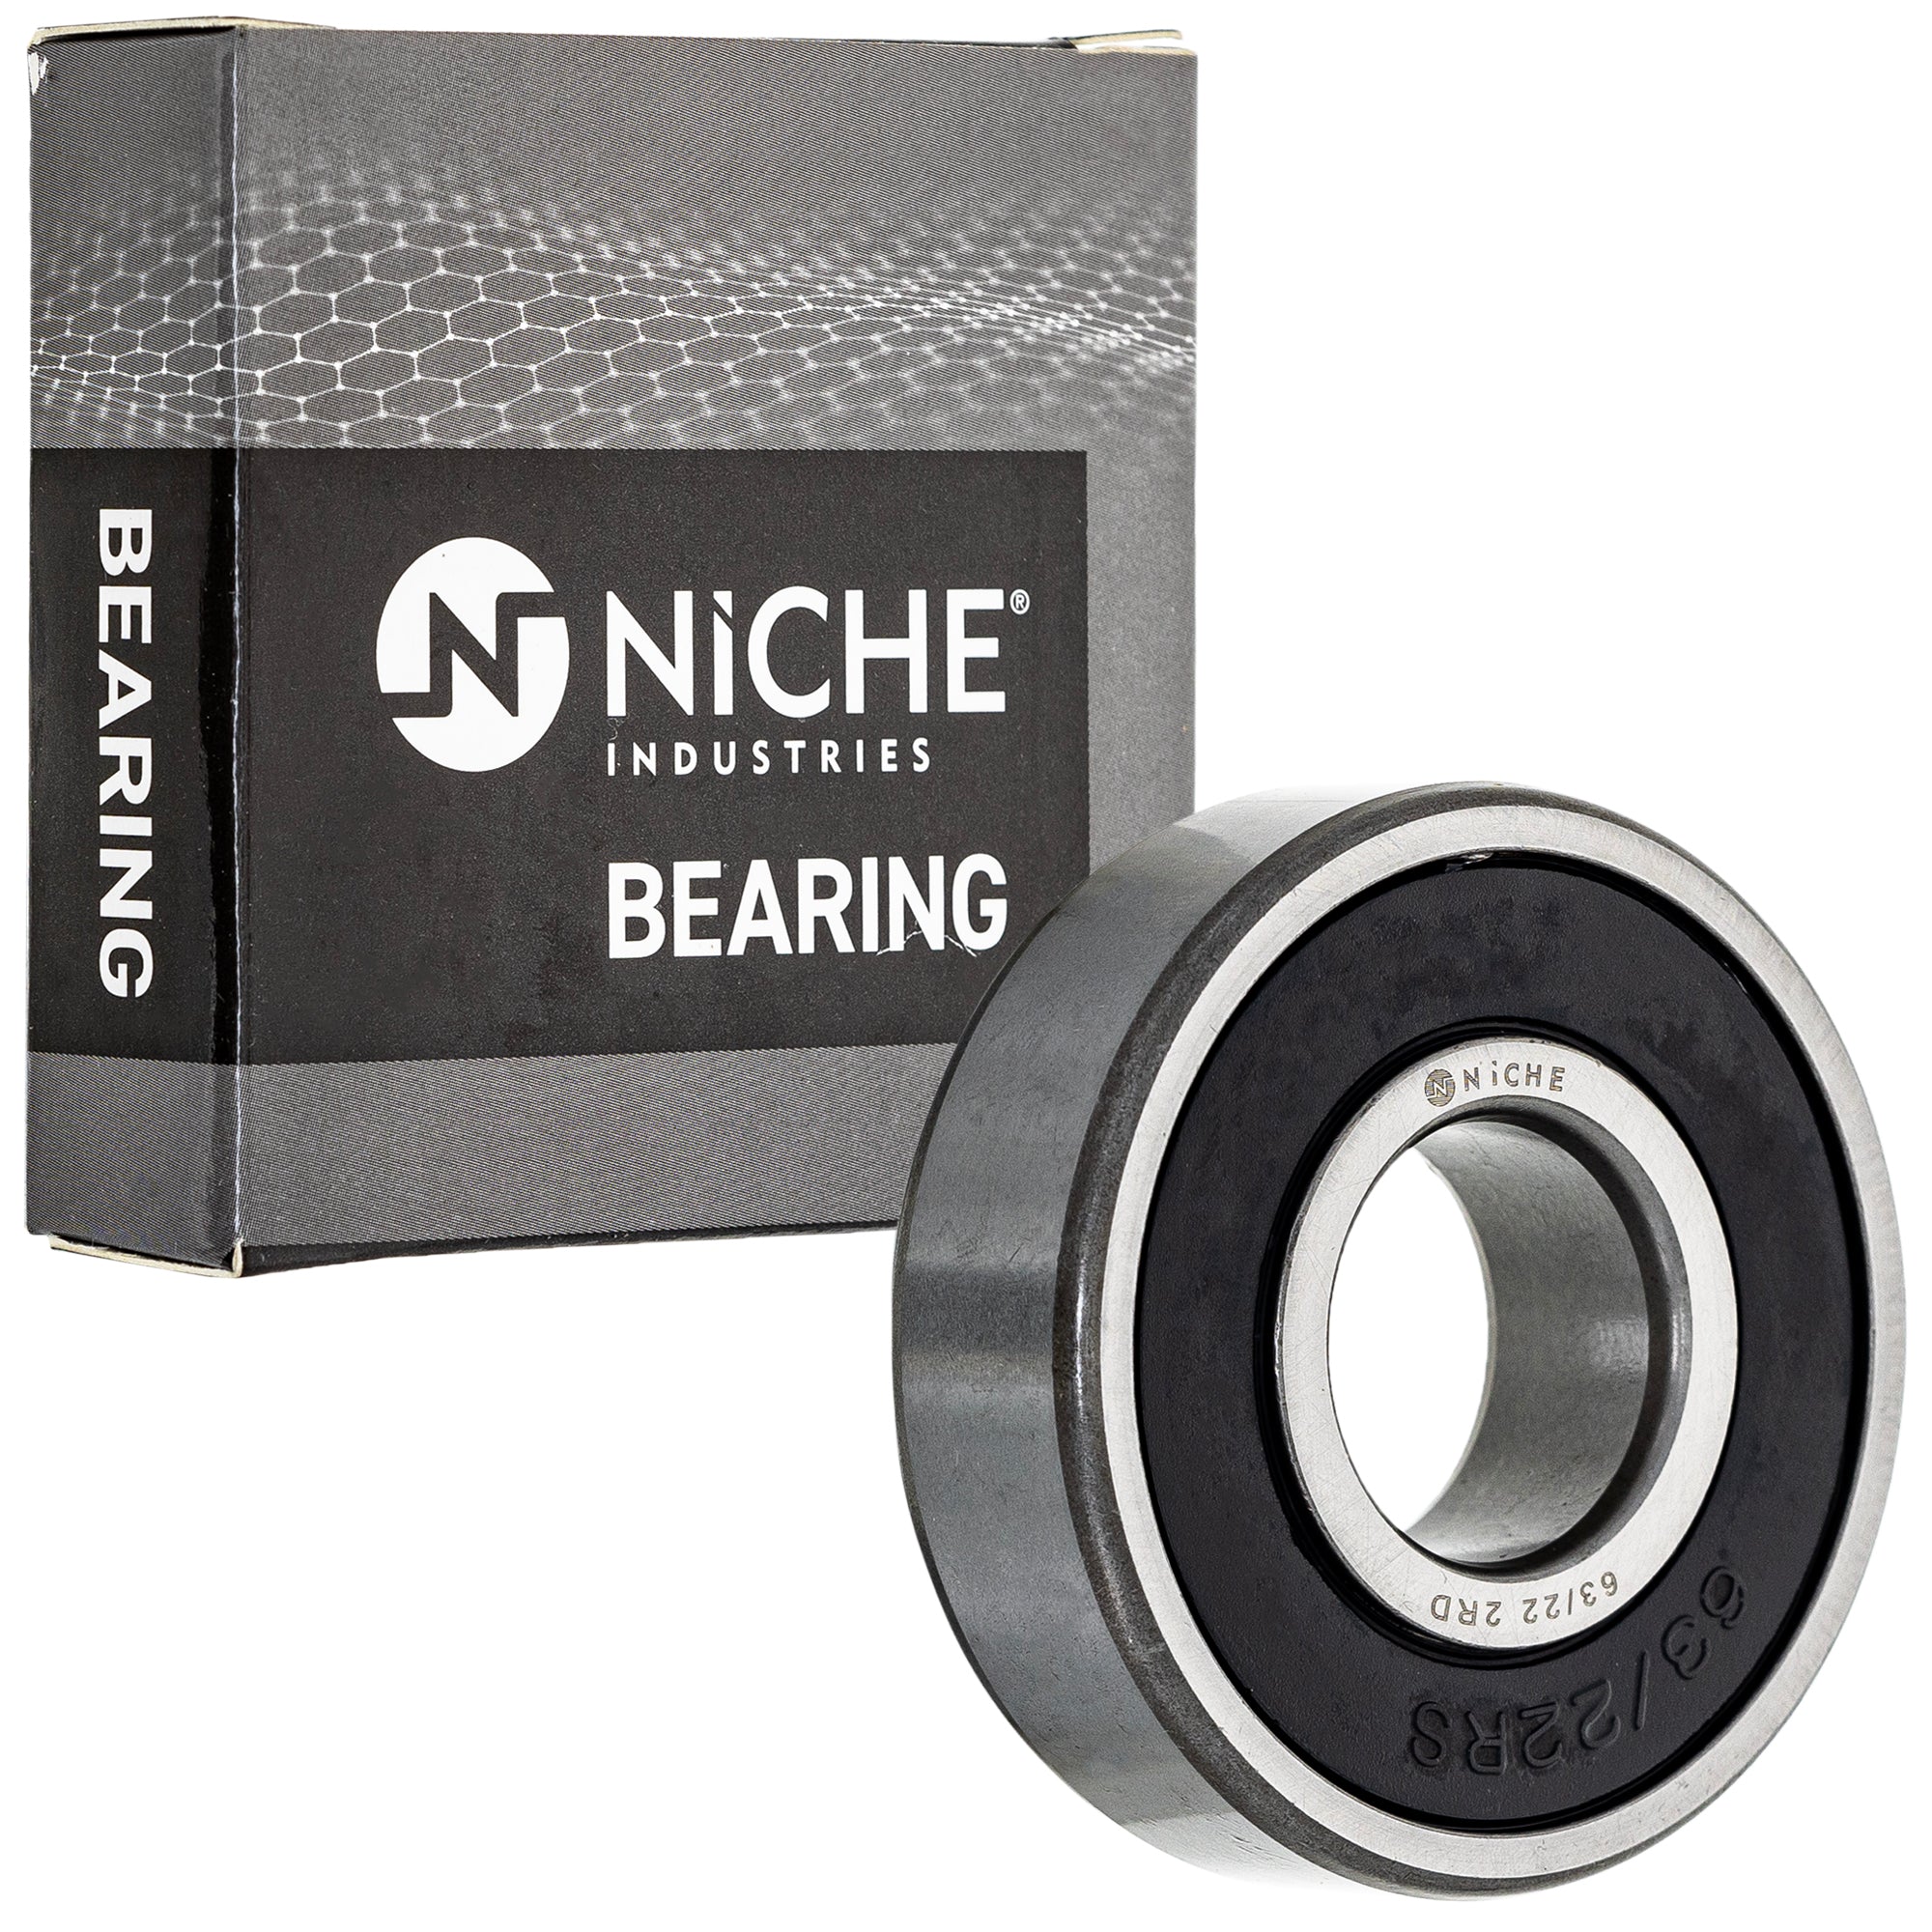 NICHE 519-CBB2286R Bearing 2-Pack for zOTHER TDM850 Seca FZR600R